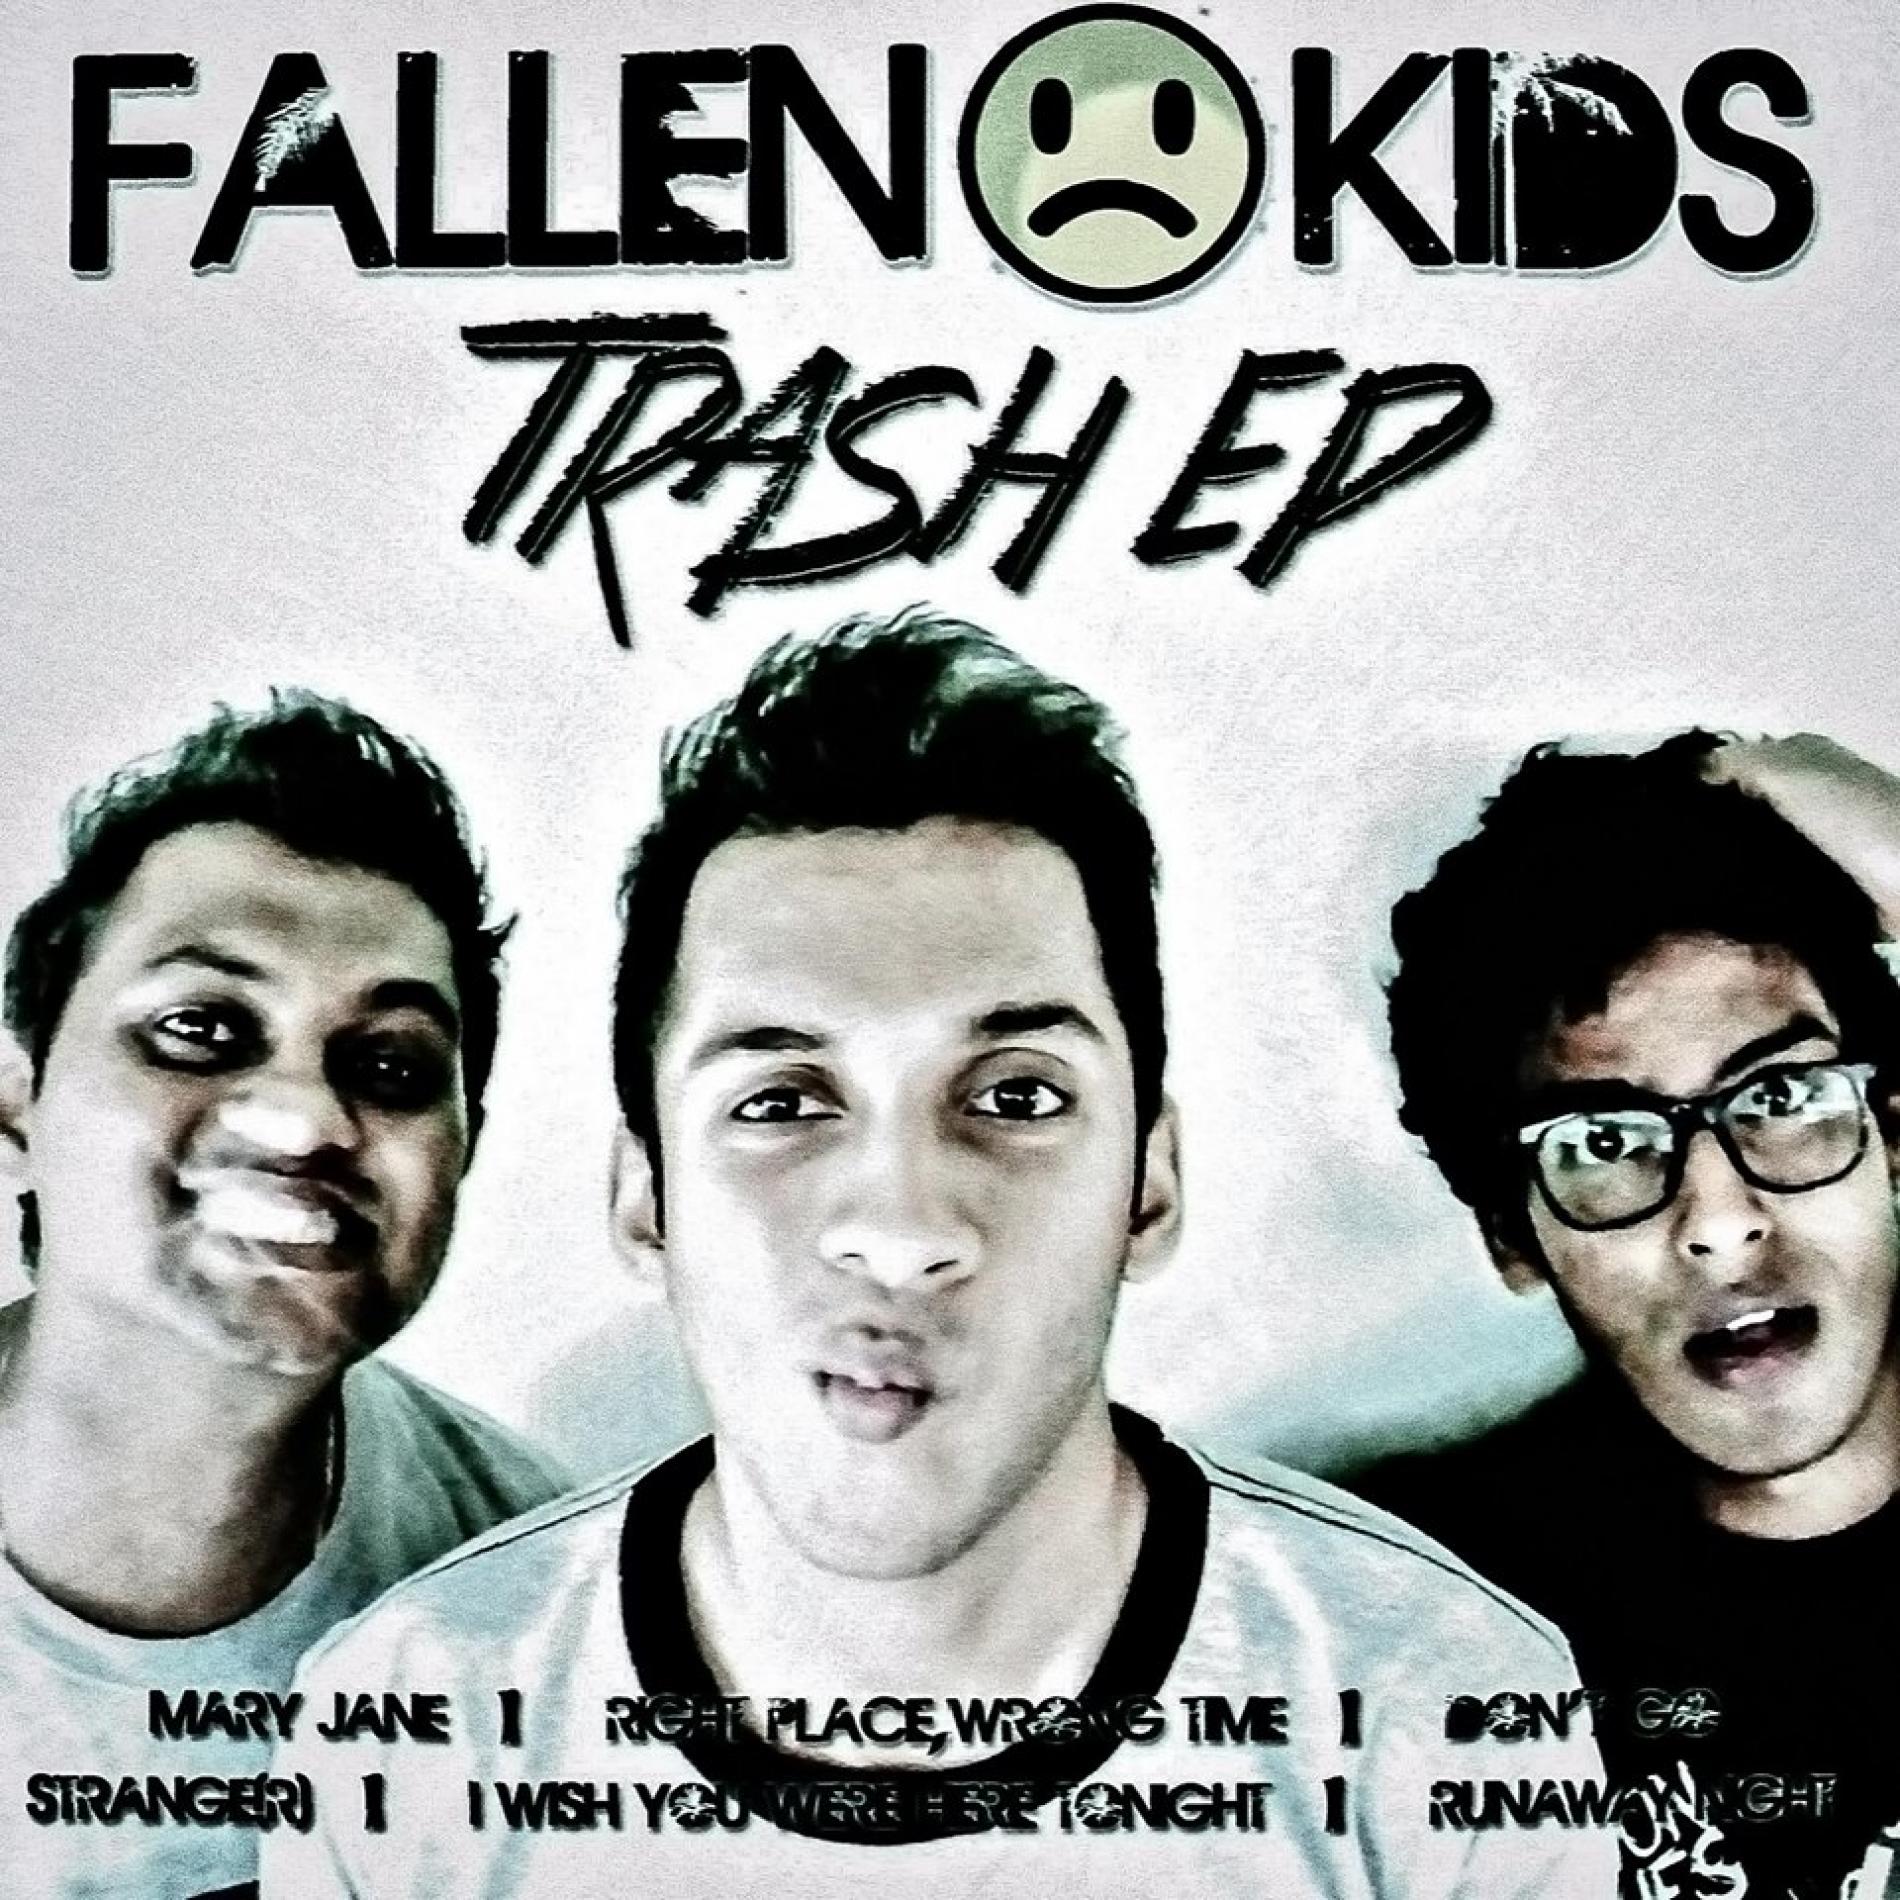 The Fallen Kids Have An EP Out